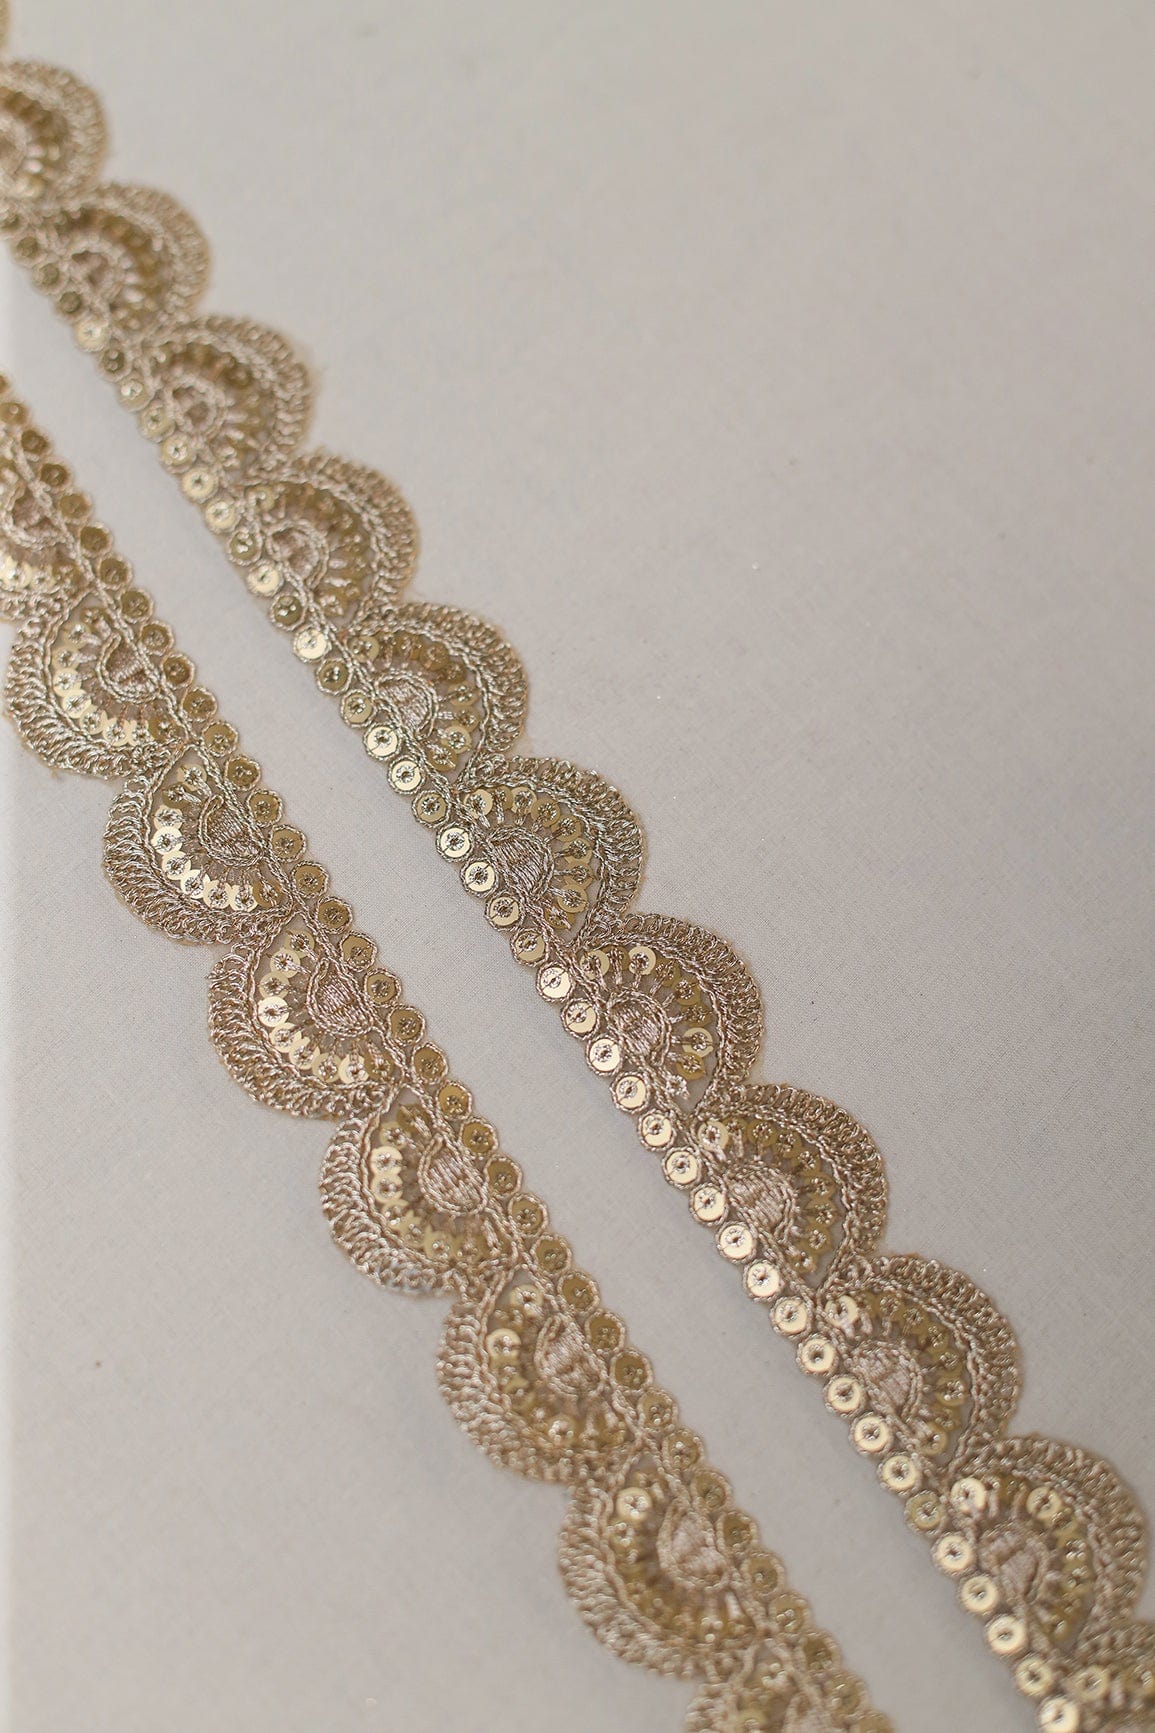 doeraa Laces Gold Zari With Gold Sequins Embroidered Scallop Lace (9 Meters)